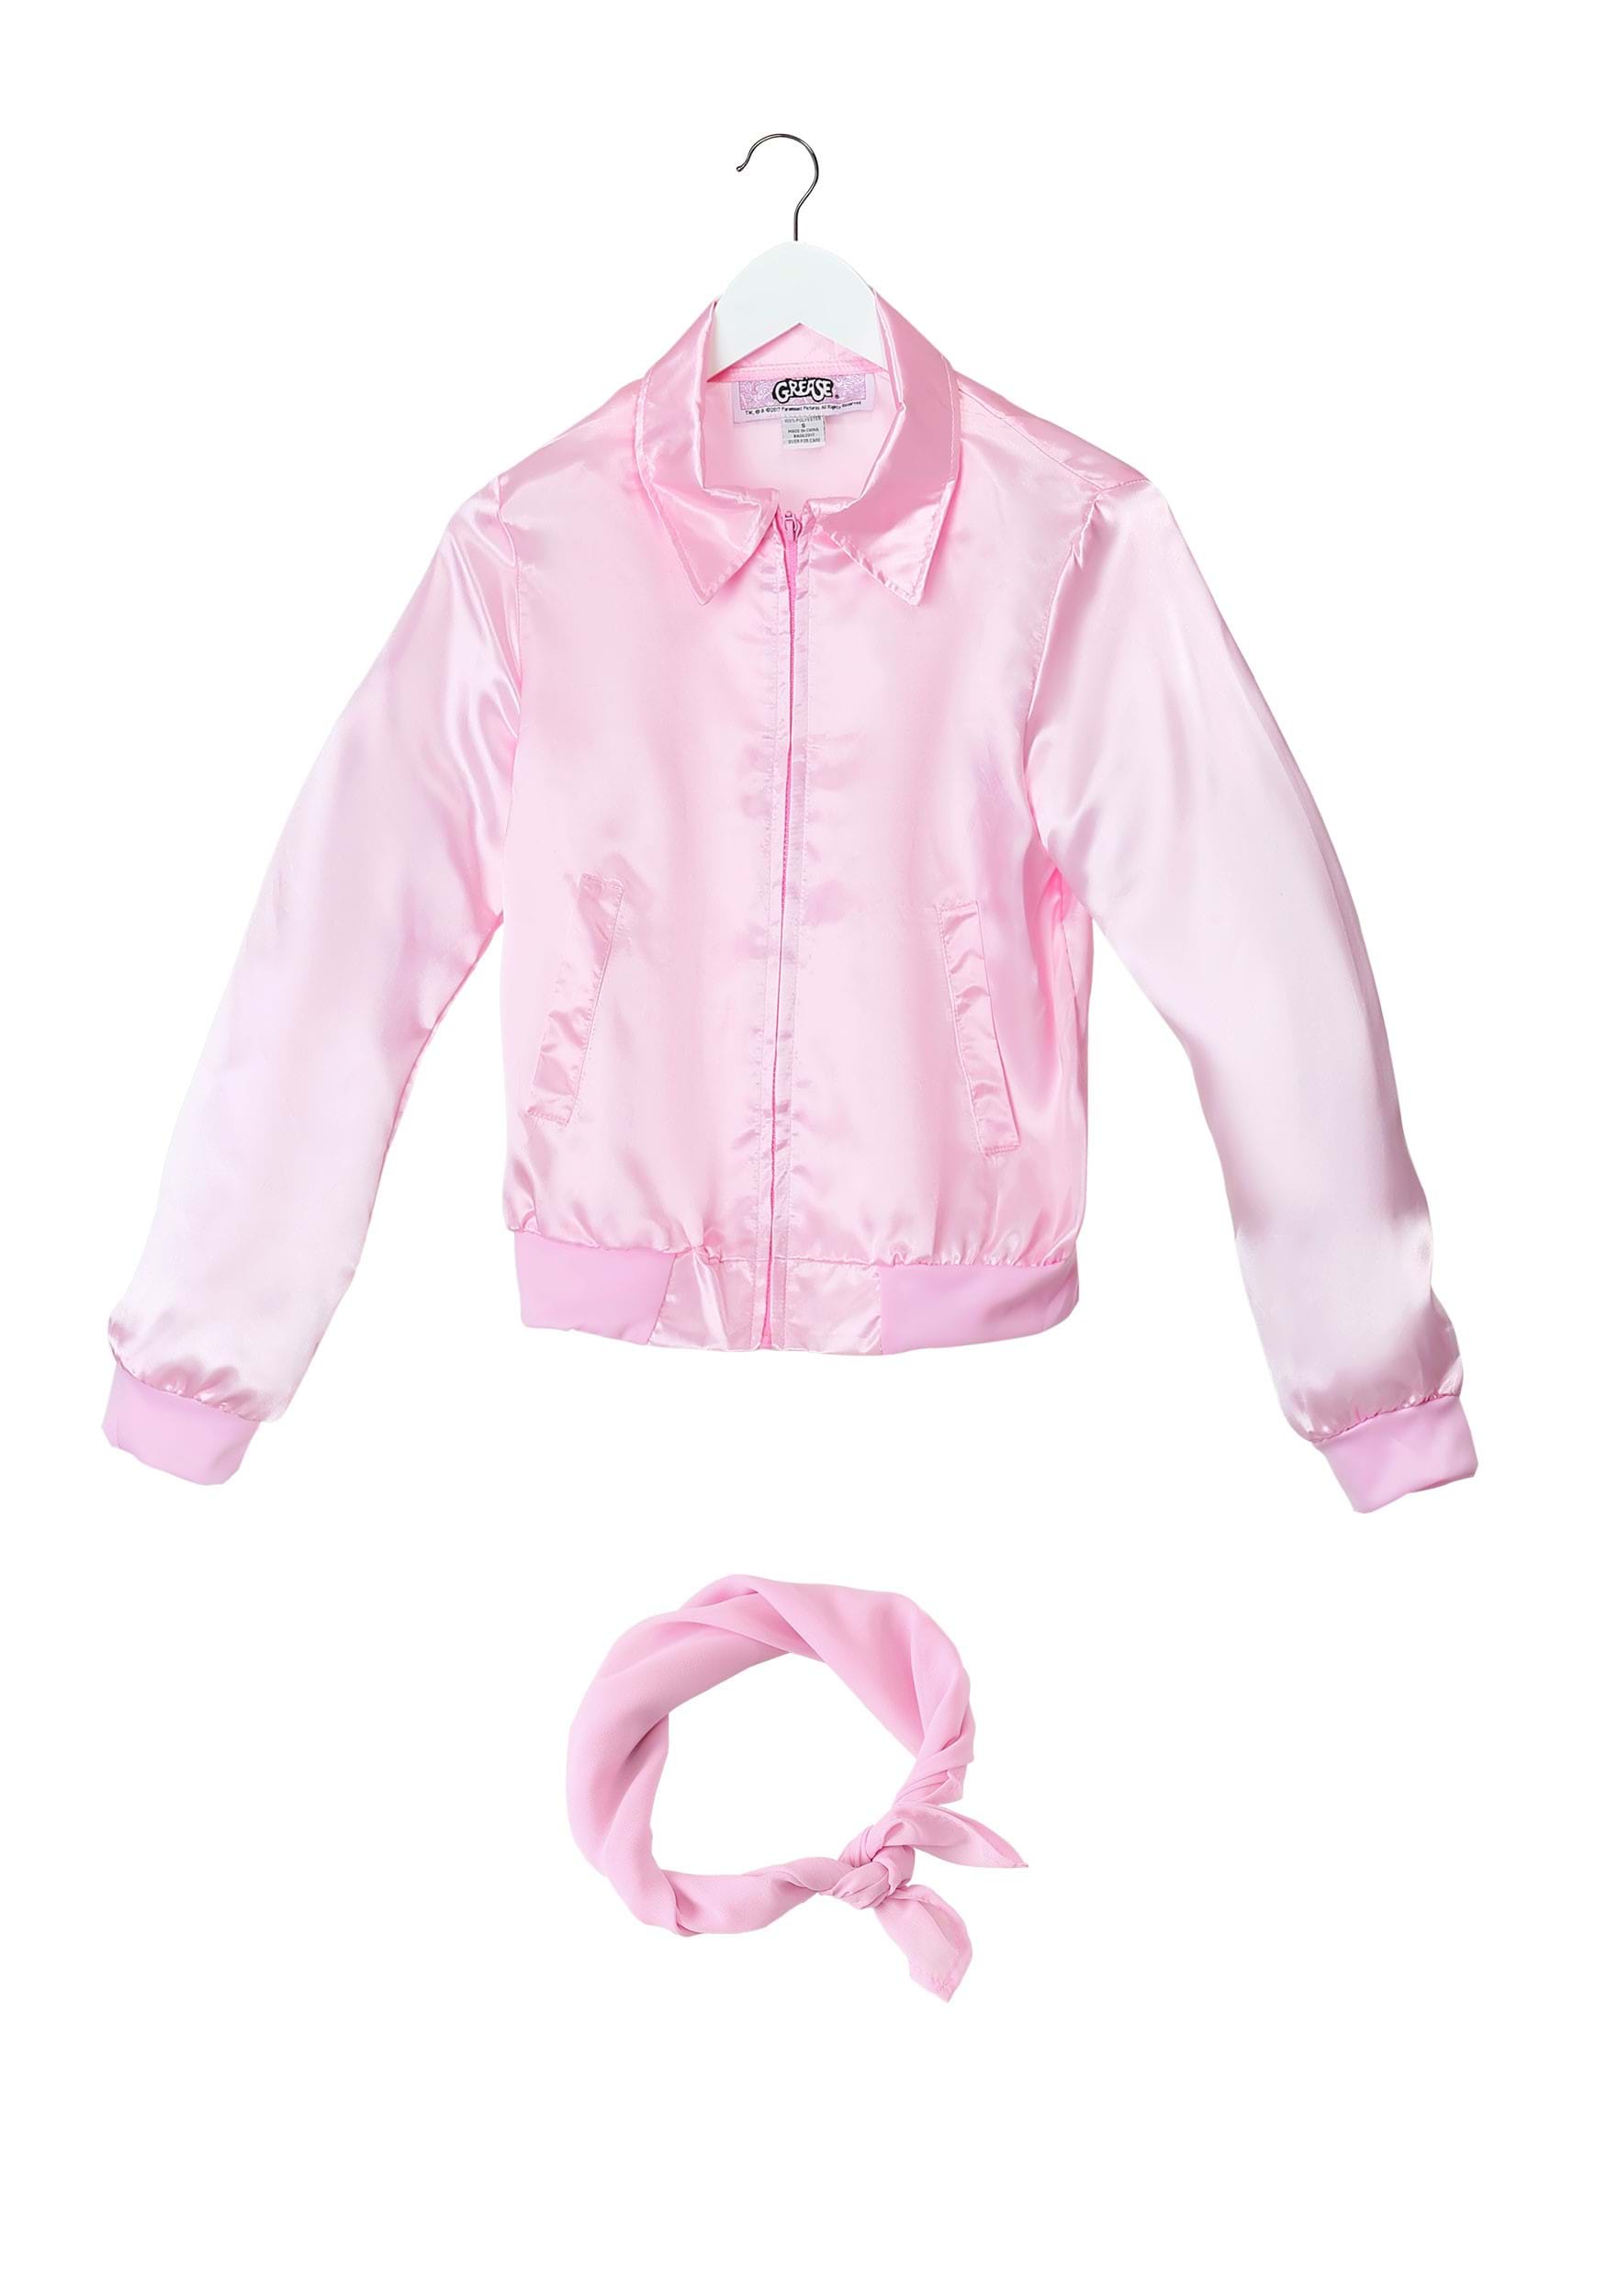 Details about   Women's Grease Pink Ladies Jacket Costume SIZE XS S M L 5X Used 